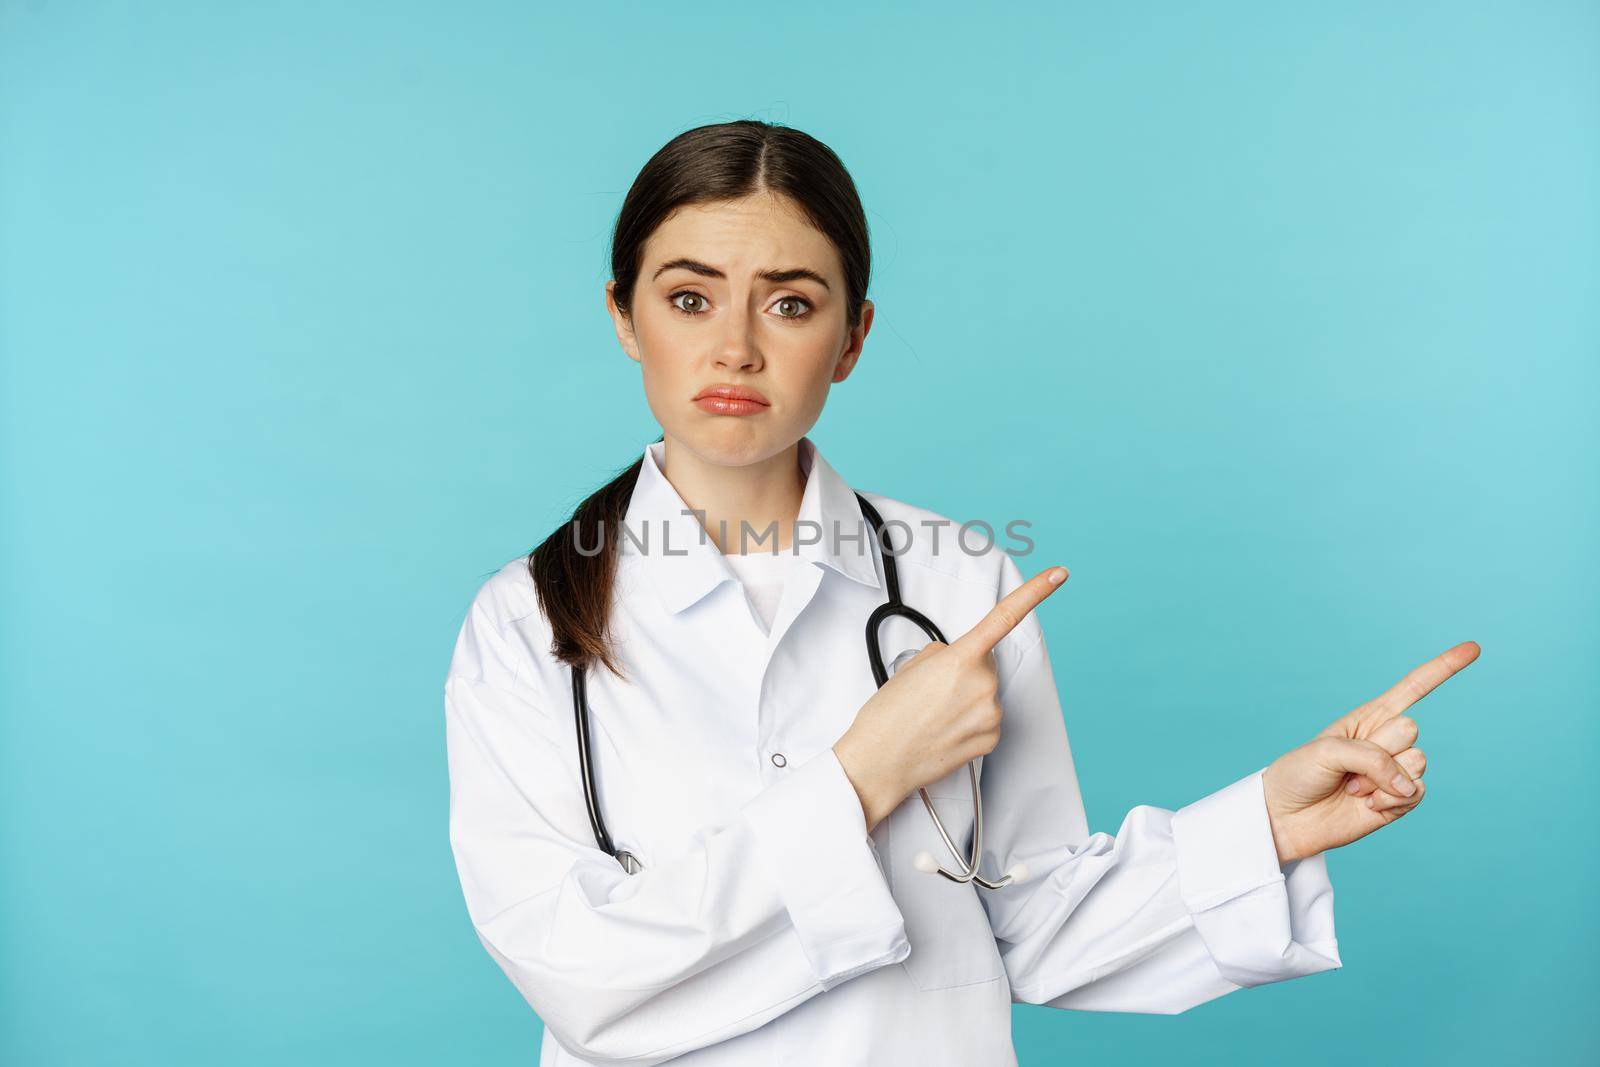 Portrait of disappointed doctor, woman medical worker pointing fingers right and looking sad, regret, gloomy face expression, blue background.